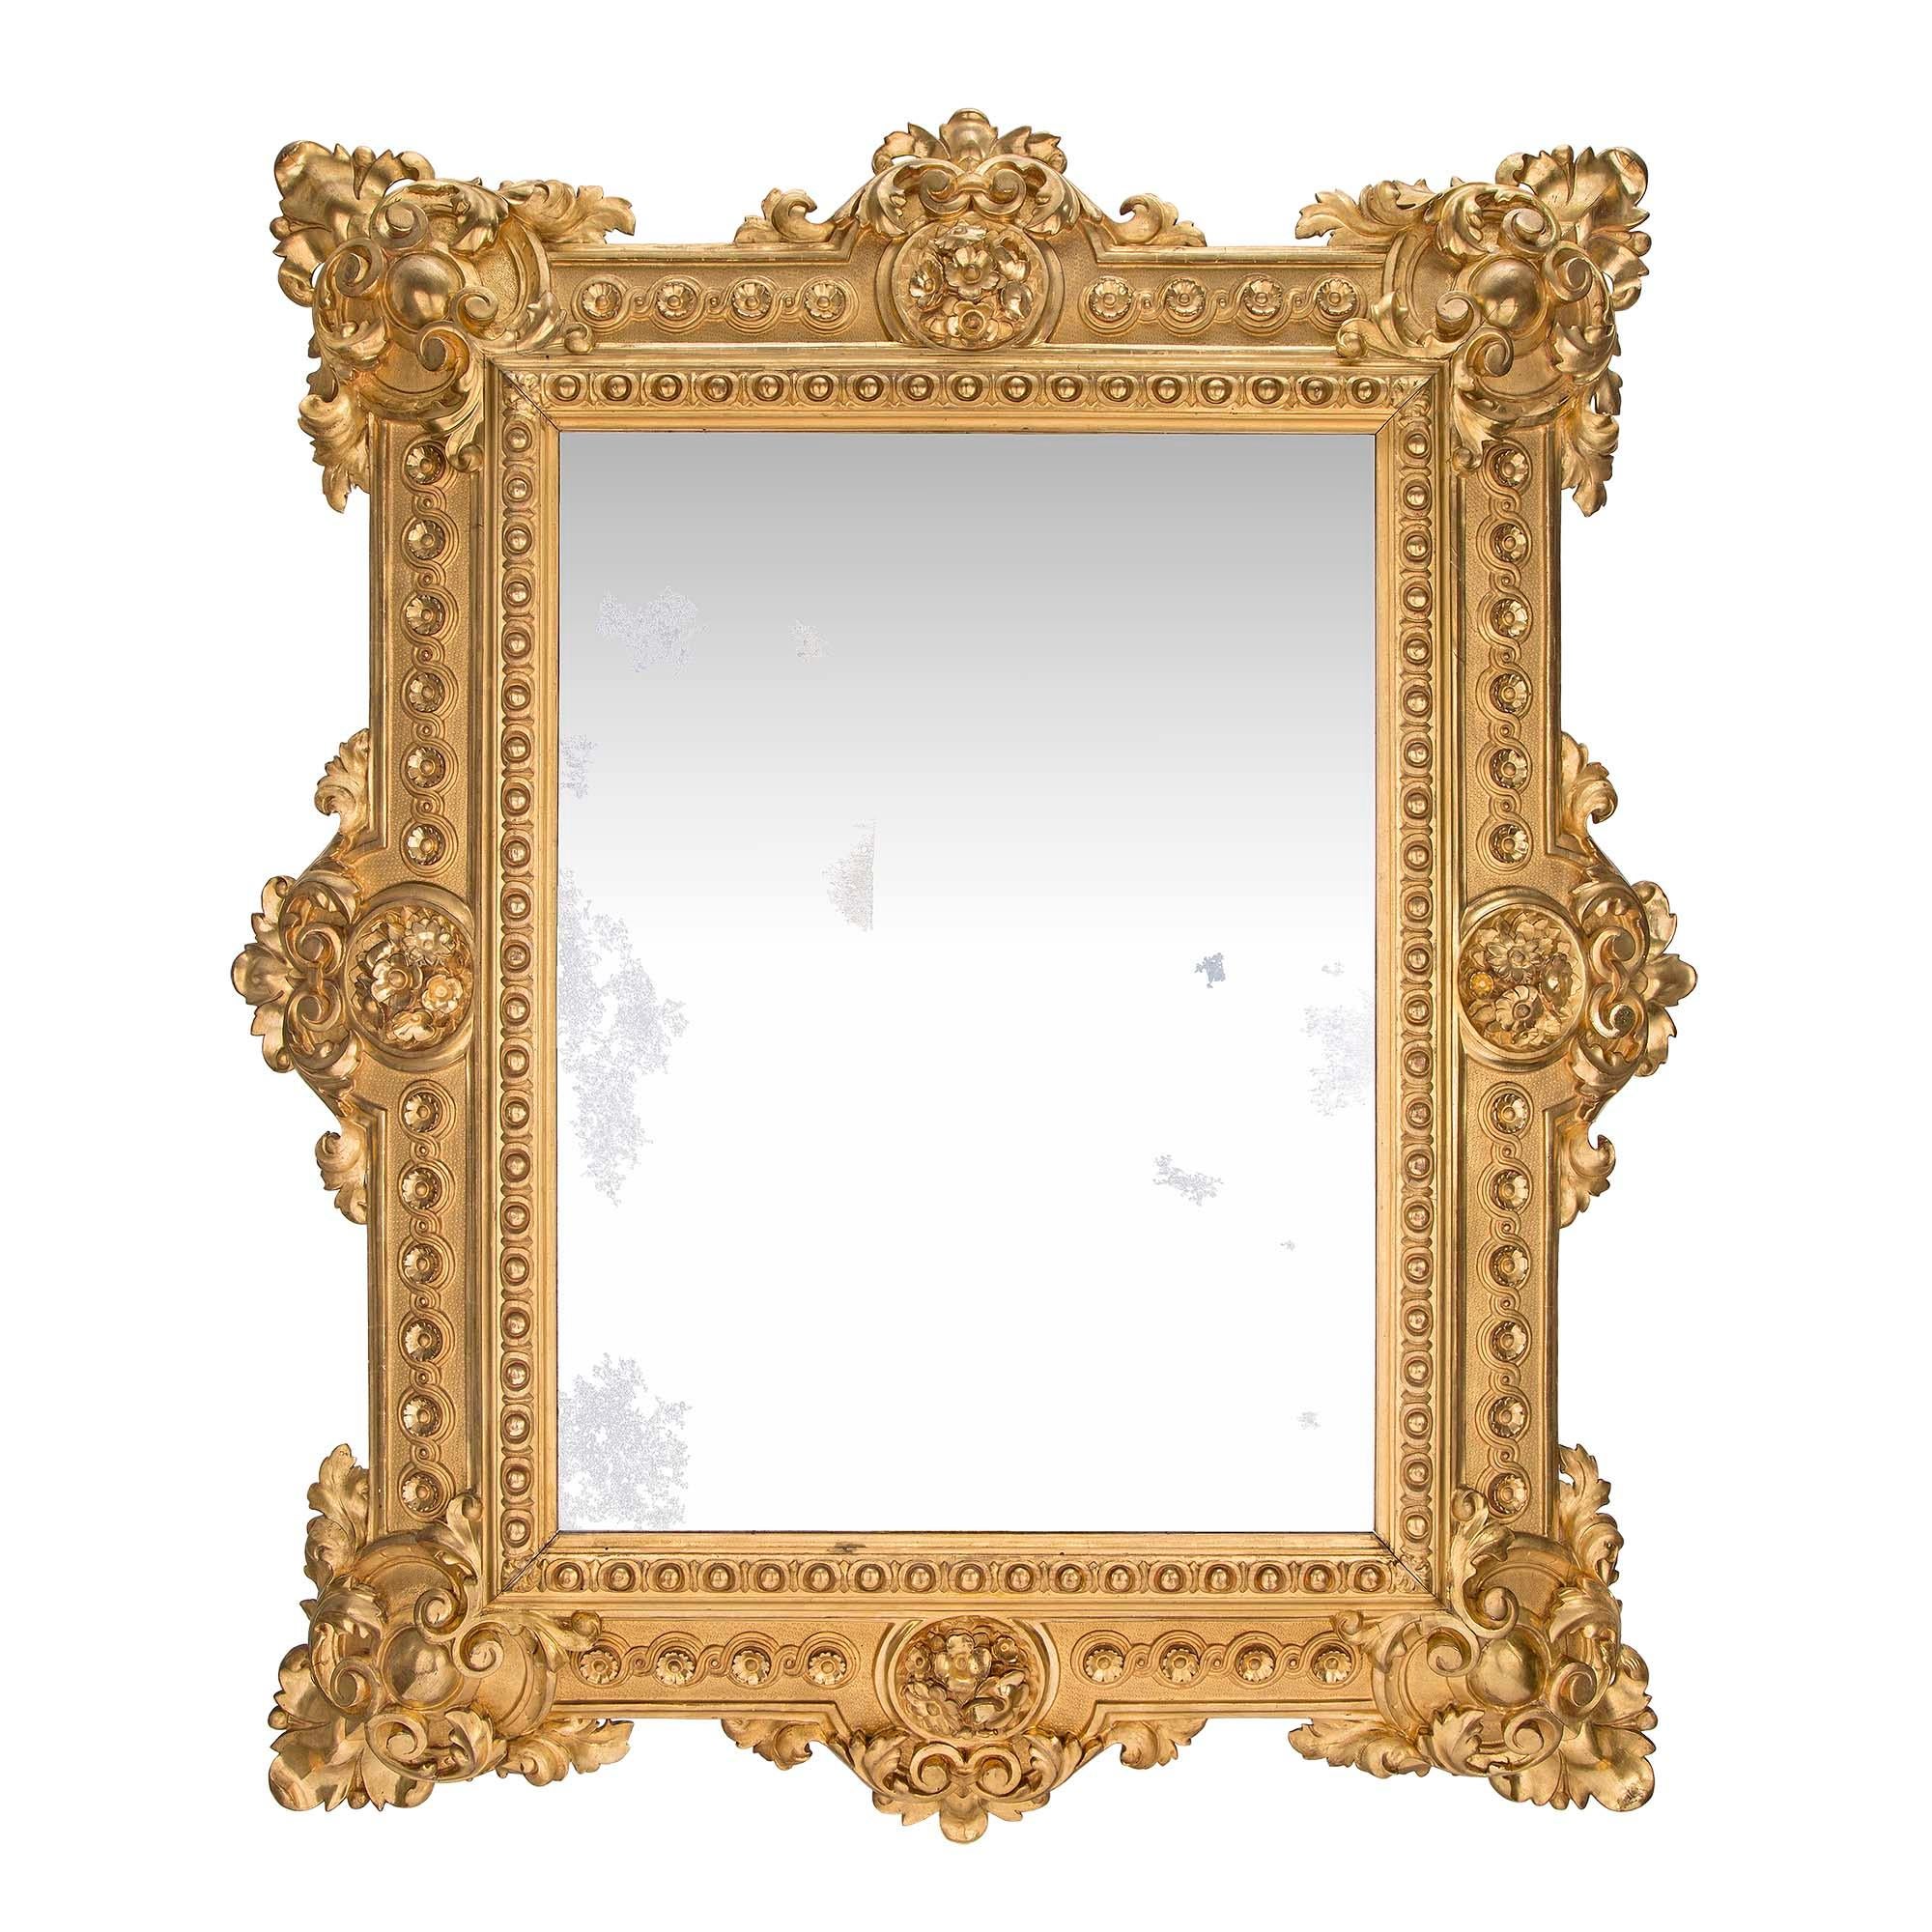 A striking French 19th century Renaissance st. finely carved giltwood mirror. This remarkable mirror has the original mirror plate and is framed within an inner beaded border with circular floral reserves. Each corner and side is opulently decorated